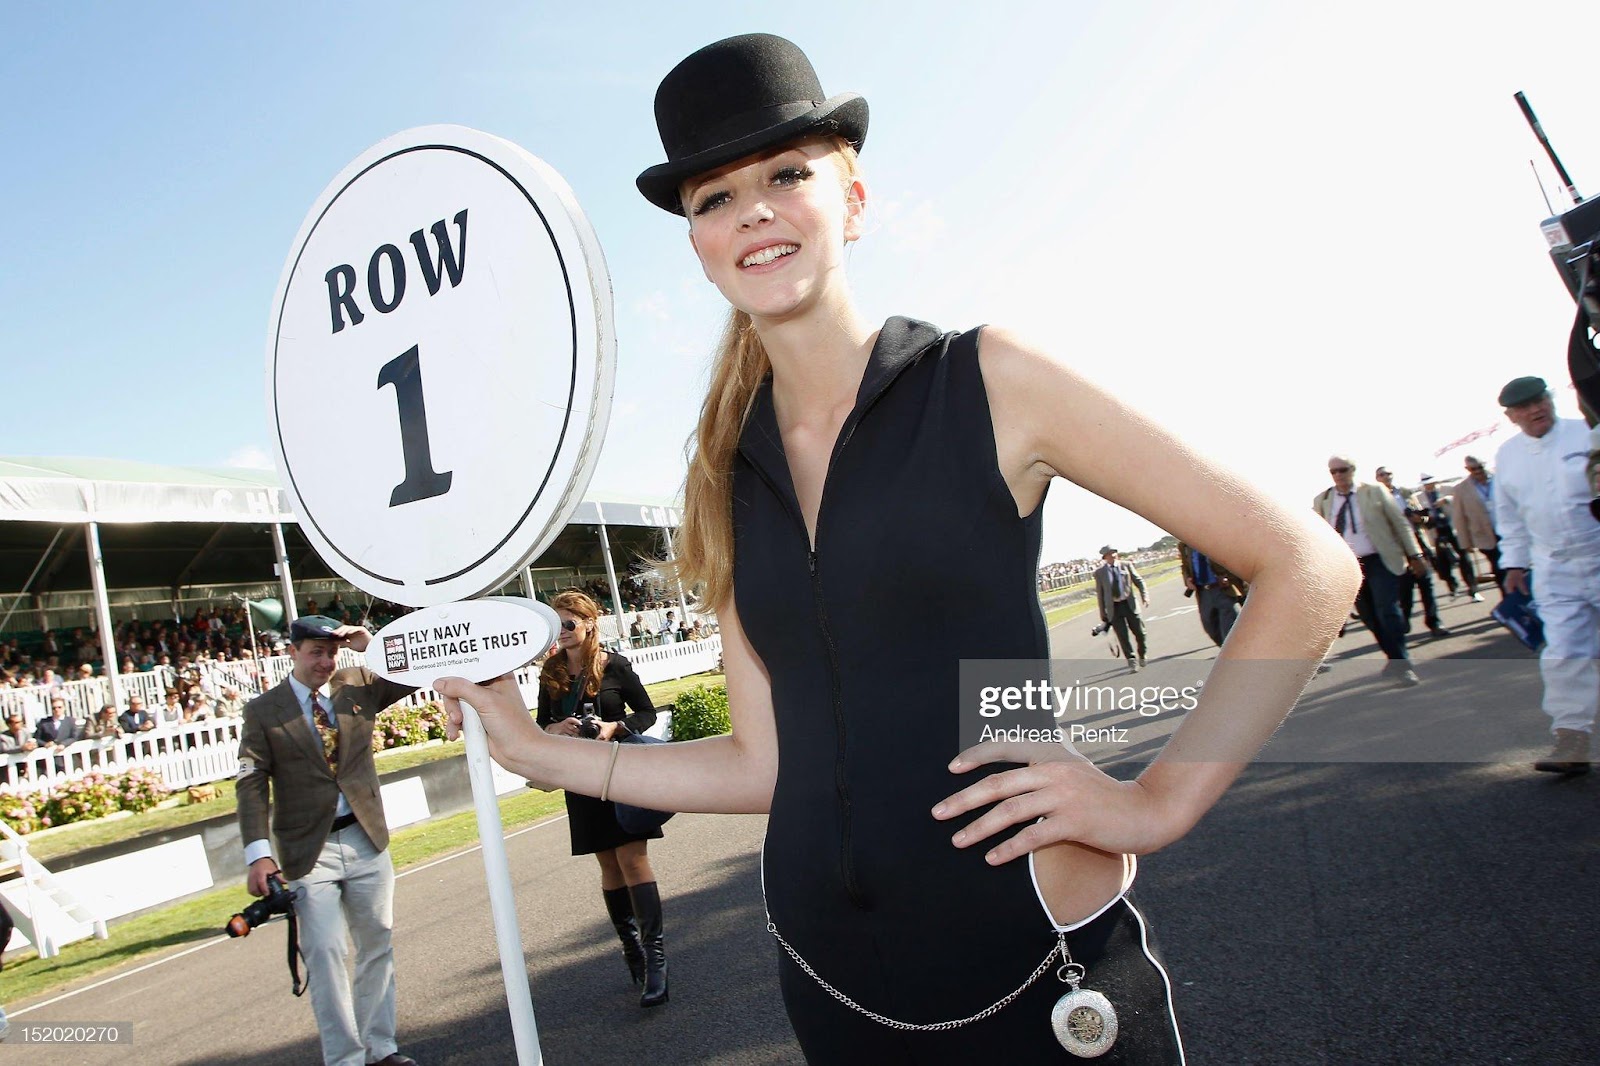 D:\Documenti\posts\posts\Women and motorsport\foto\Getty e altre\grid-girl-attends-the-shelby-cup-during-the-goodwood-revival-2012-on-picture-id152020270.jpg